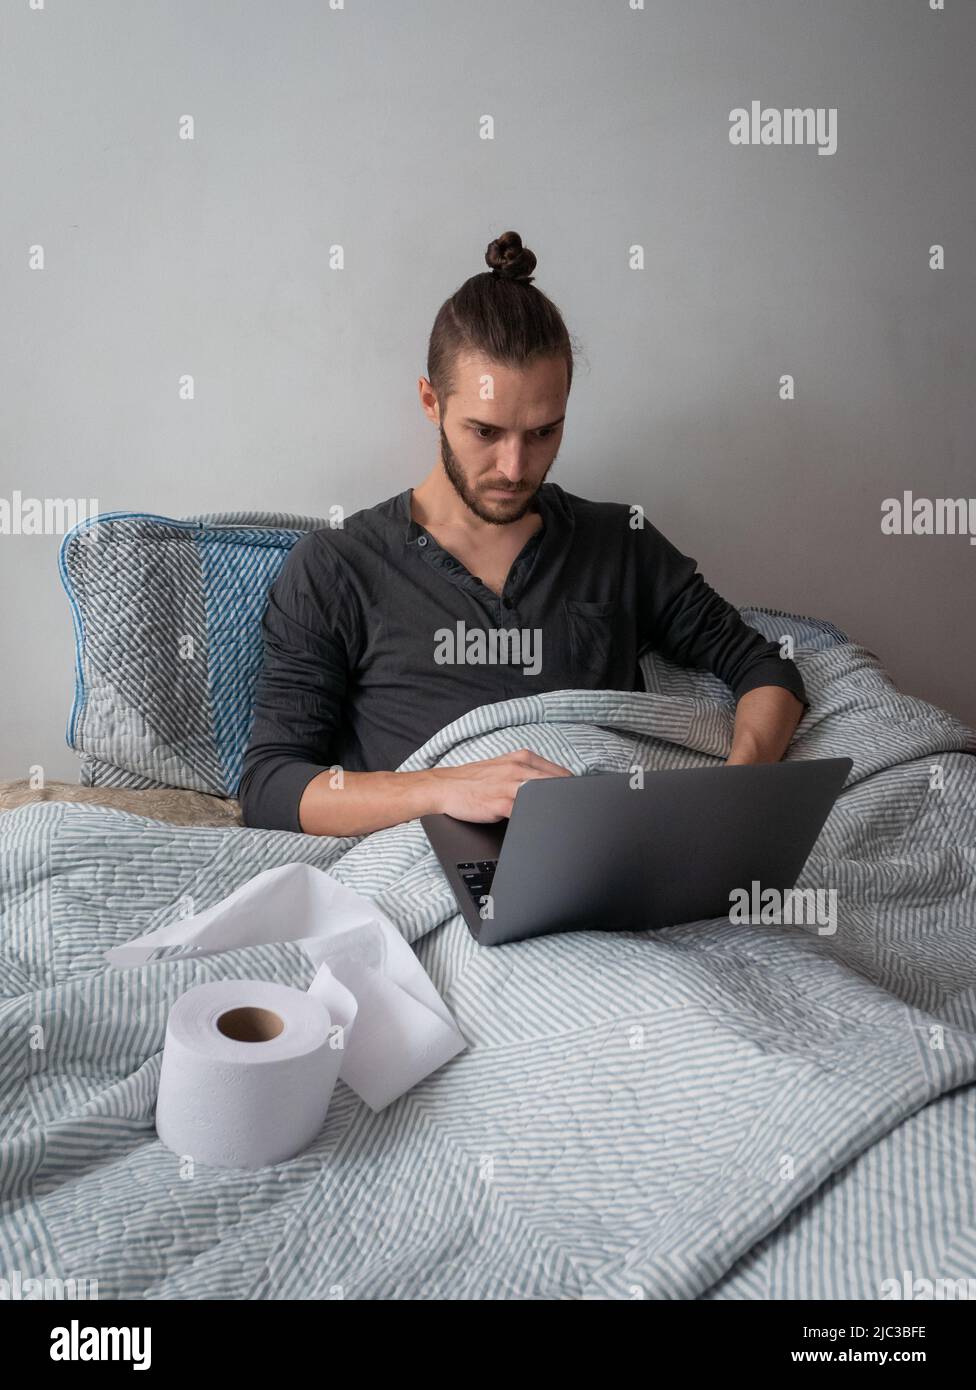 White Man in Bed with a Cold is Working on his Laptop Computer next to a Toilet Paper for his Nose Stock Photo